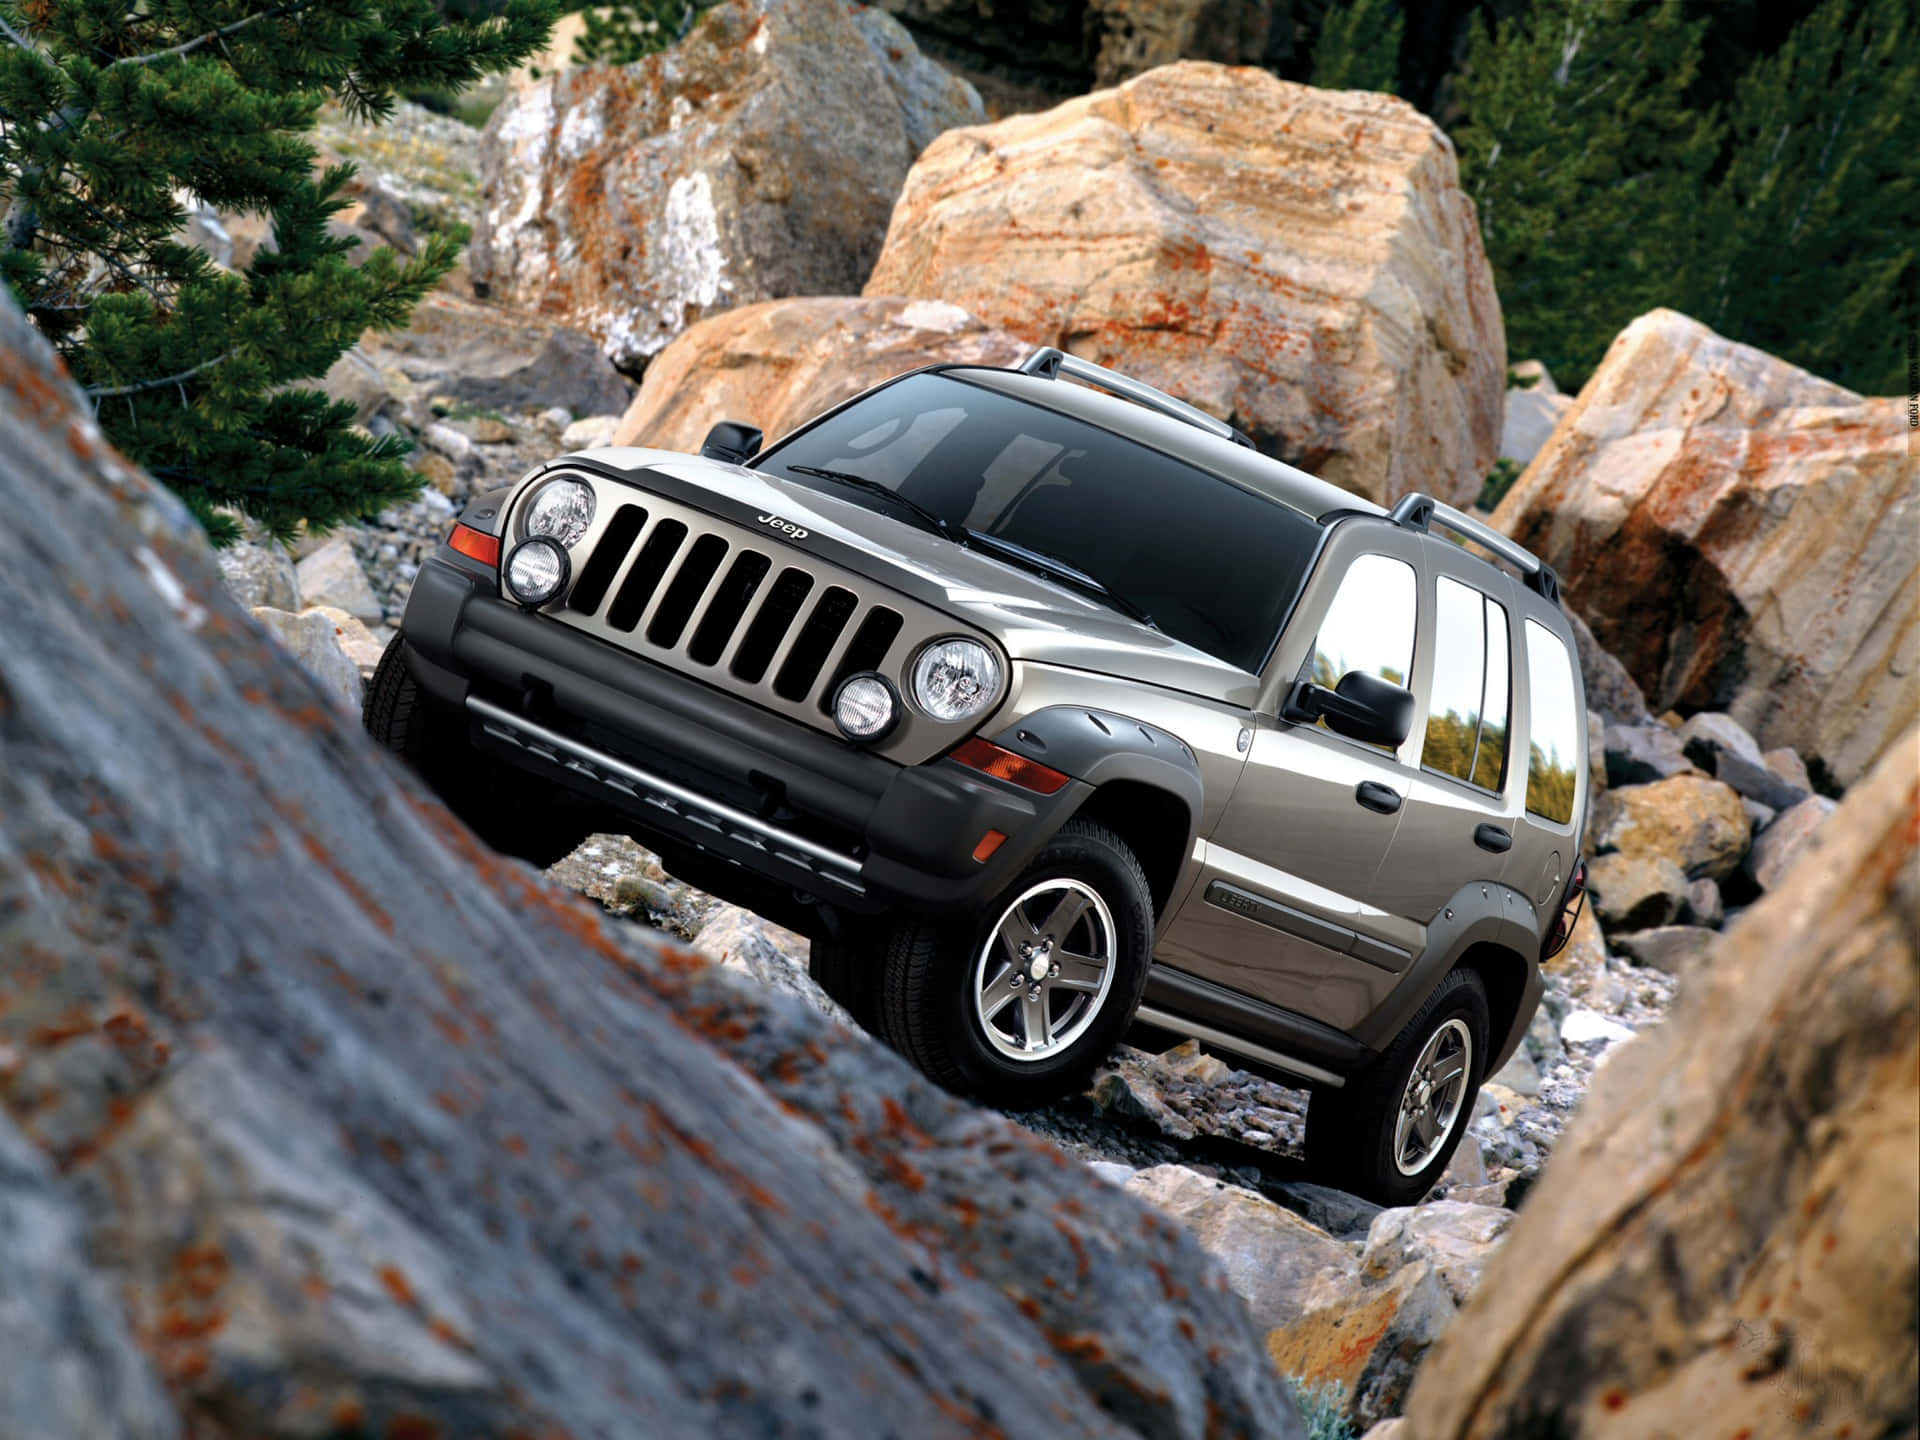 Rugged Jeep Liberty conquering the off-road terrain Wallpaper